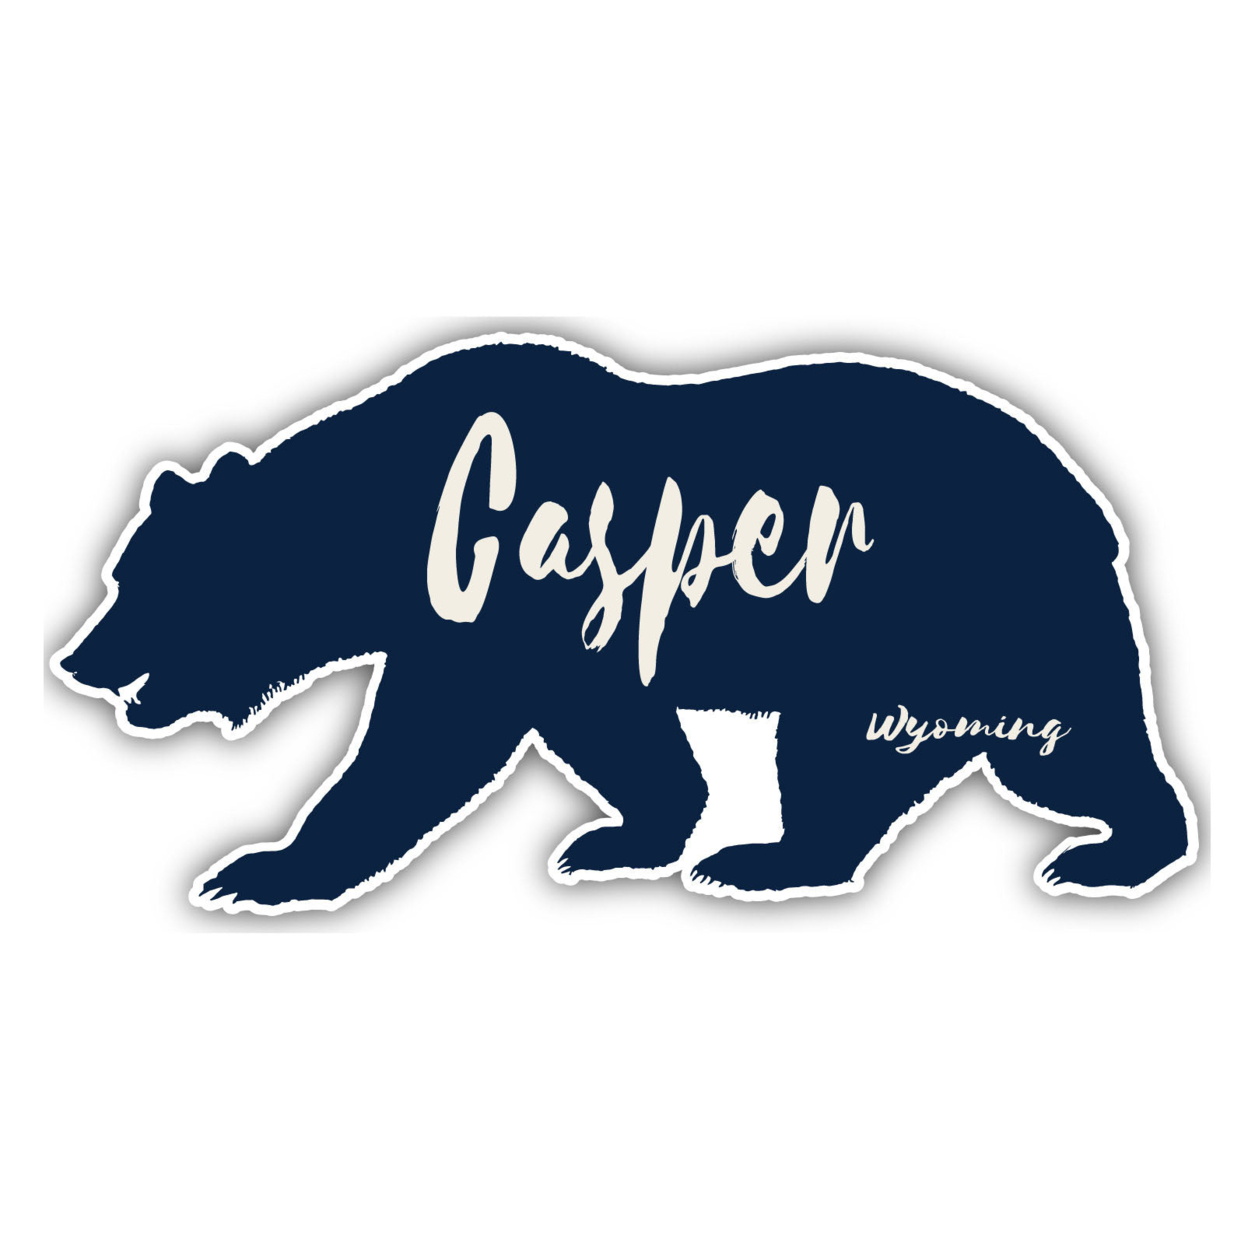 Casper Wyoming Souvenir Decorative Stickers (Choose Theme And Size) - 4-Pack, 4-Inch, Tent